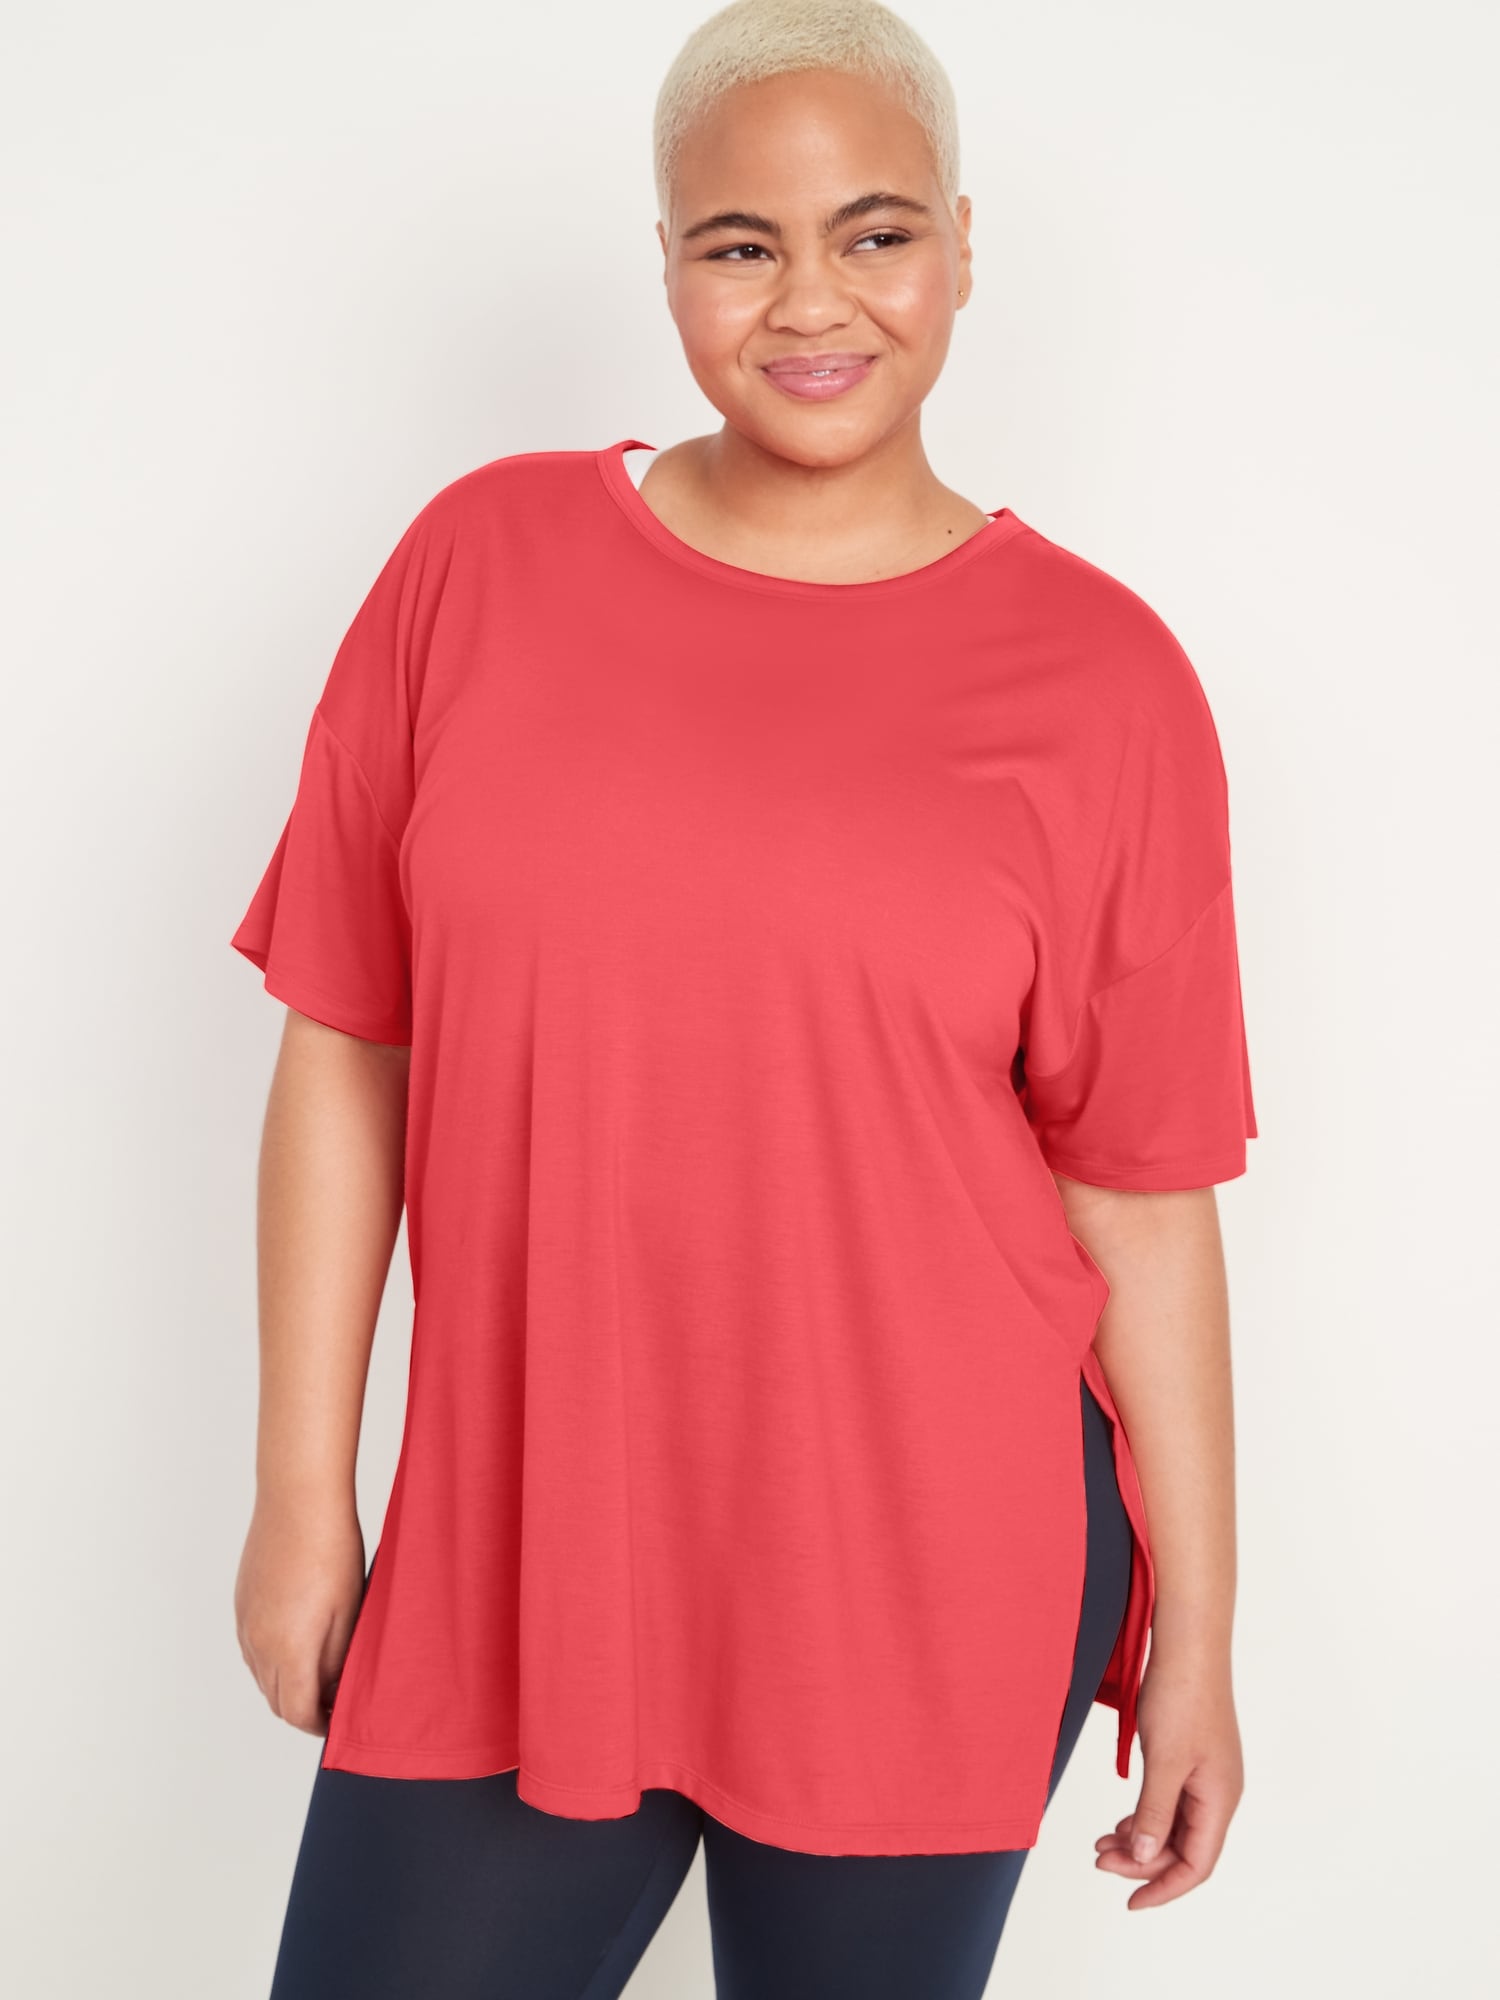 Oversized UltraLite All-Day Tunic | Old Navy